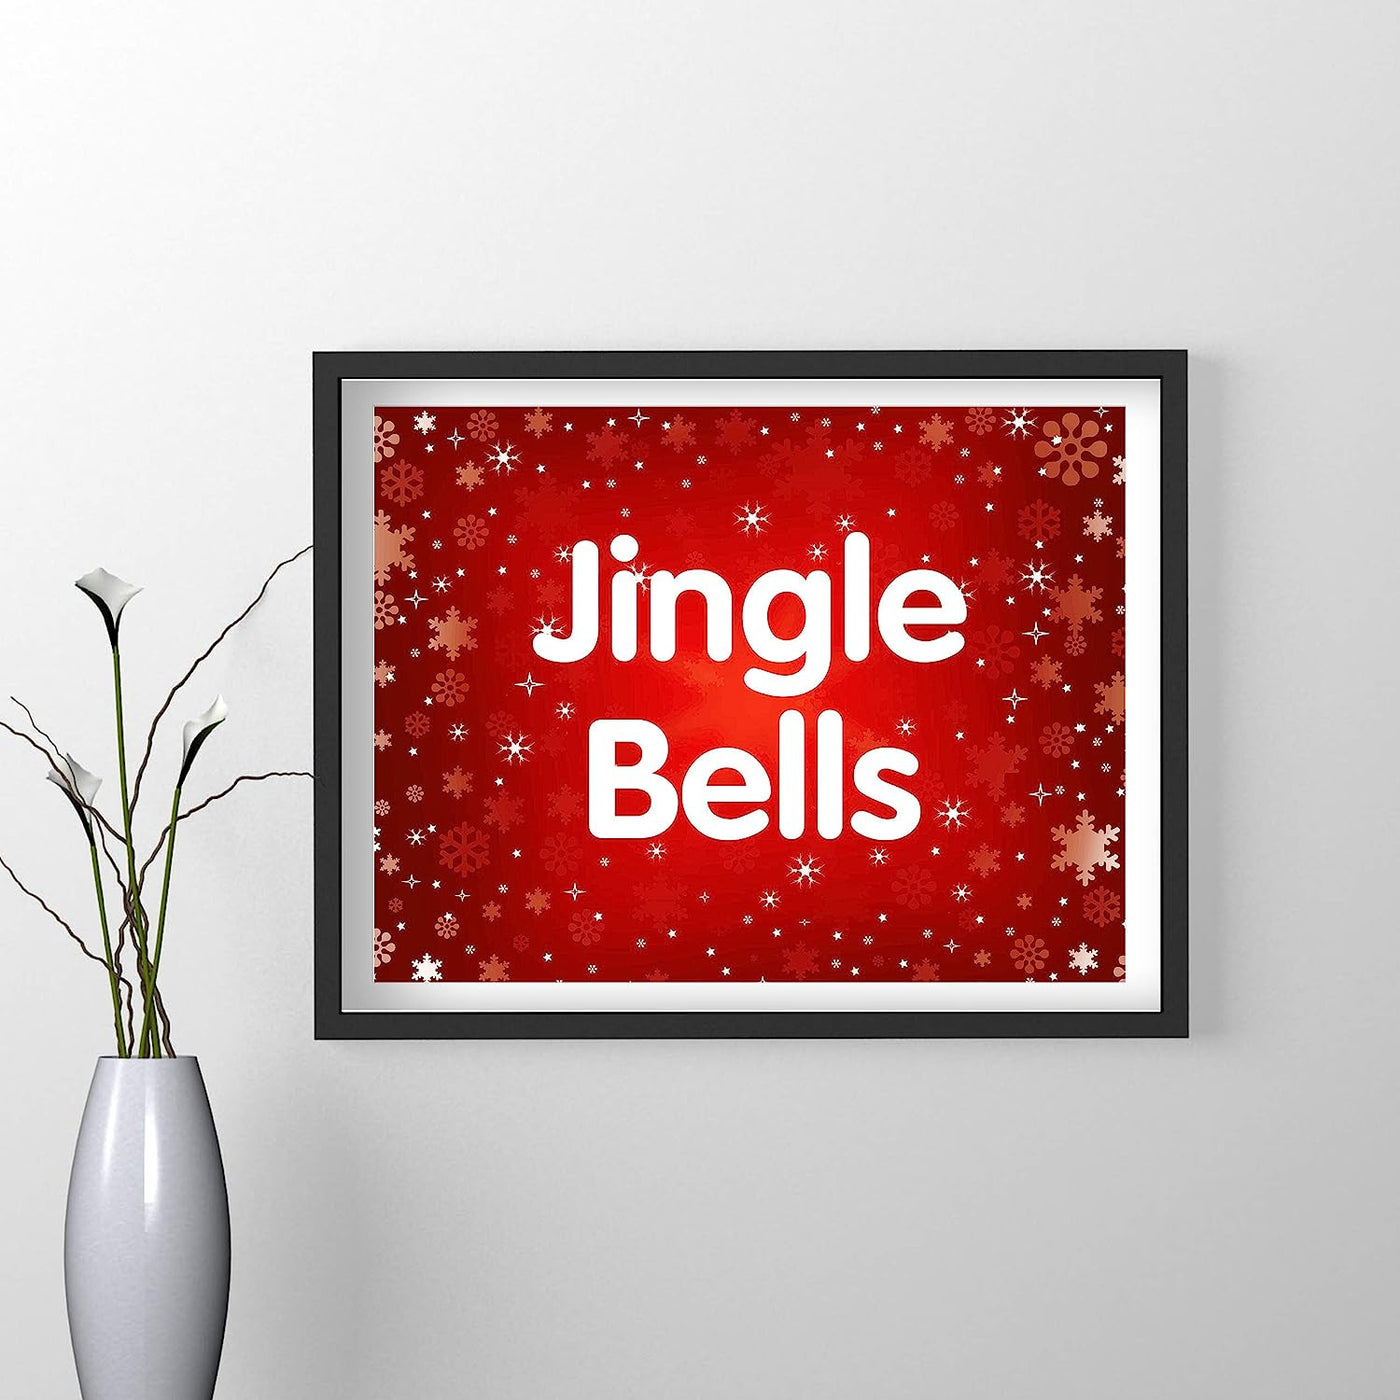 Jingle Bells Christmas Song Wall Art Decor -14 x 11" Holiday Music Wall Print -Ready to Frame. Typographic Home-Welcome-Kitchen-Farmhouse-Winter Decor. Merry Decoration-Display Your Holiday Joy!